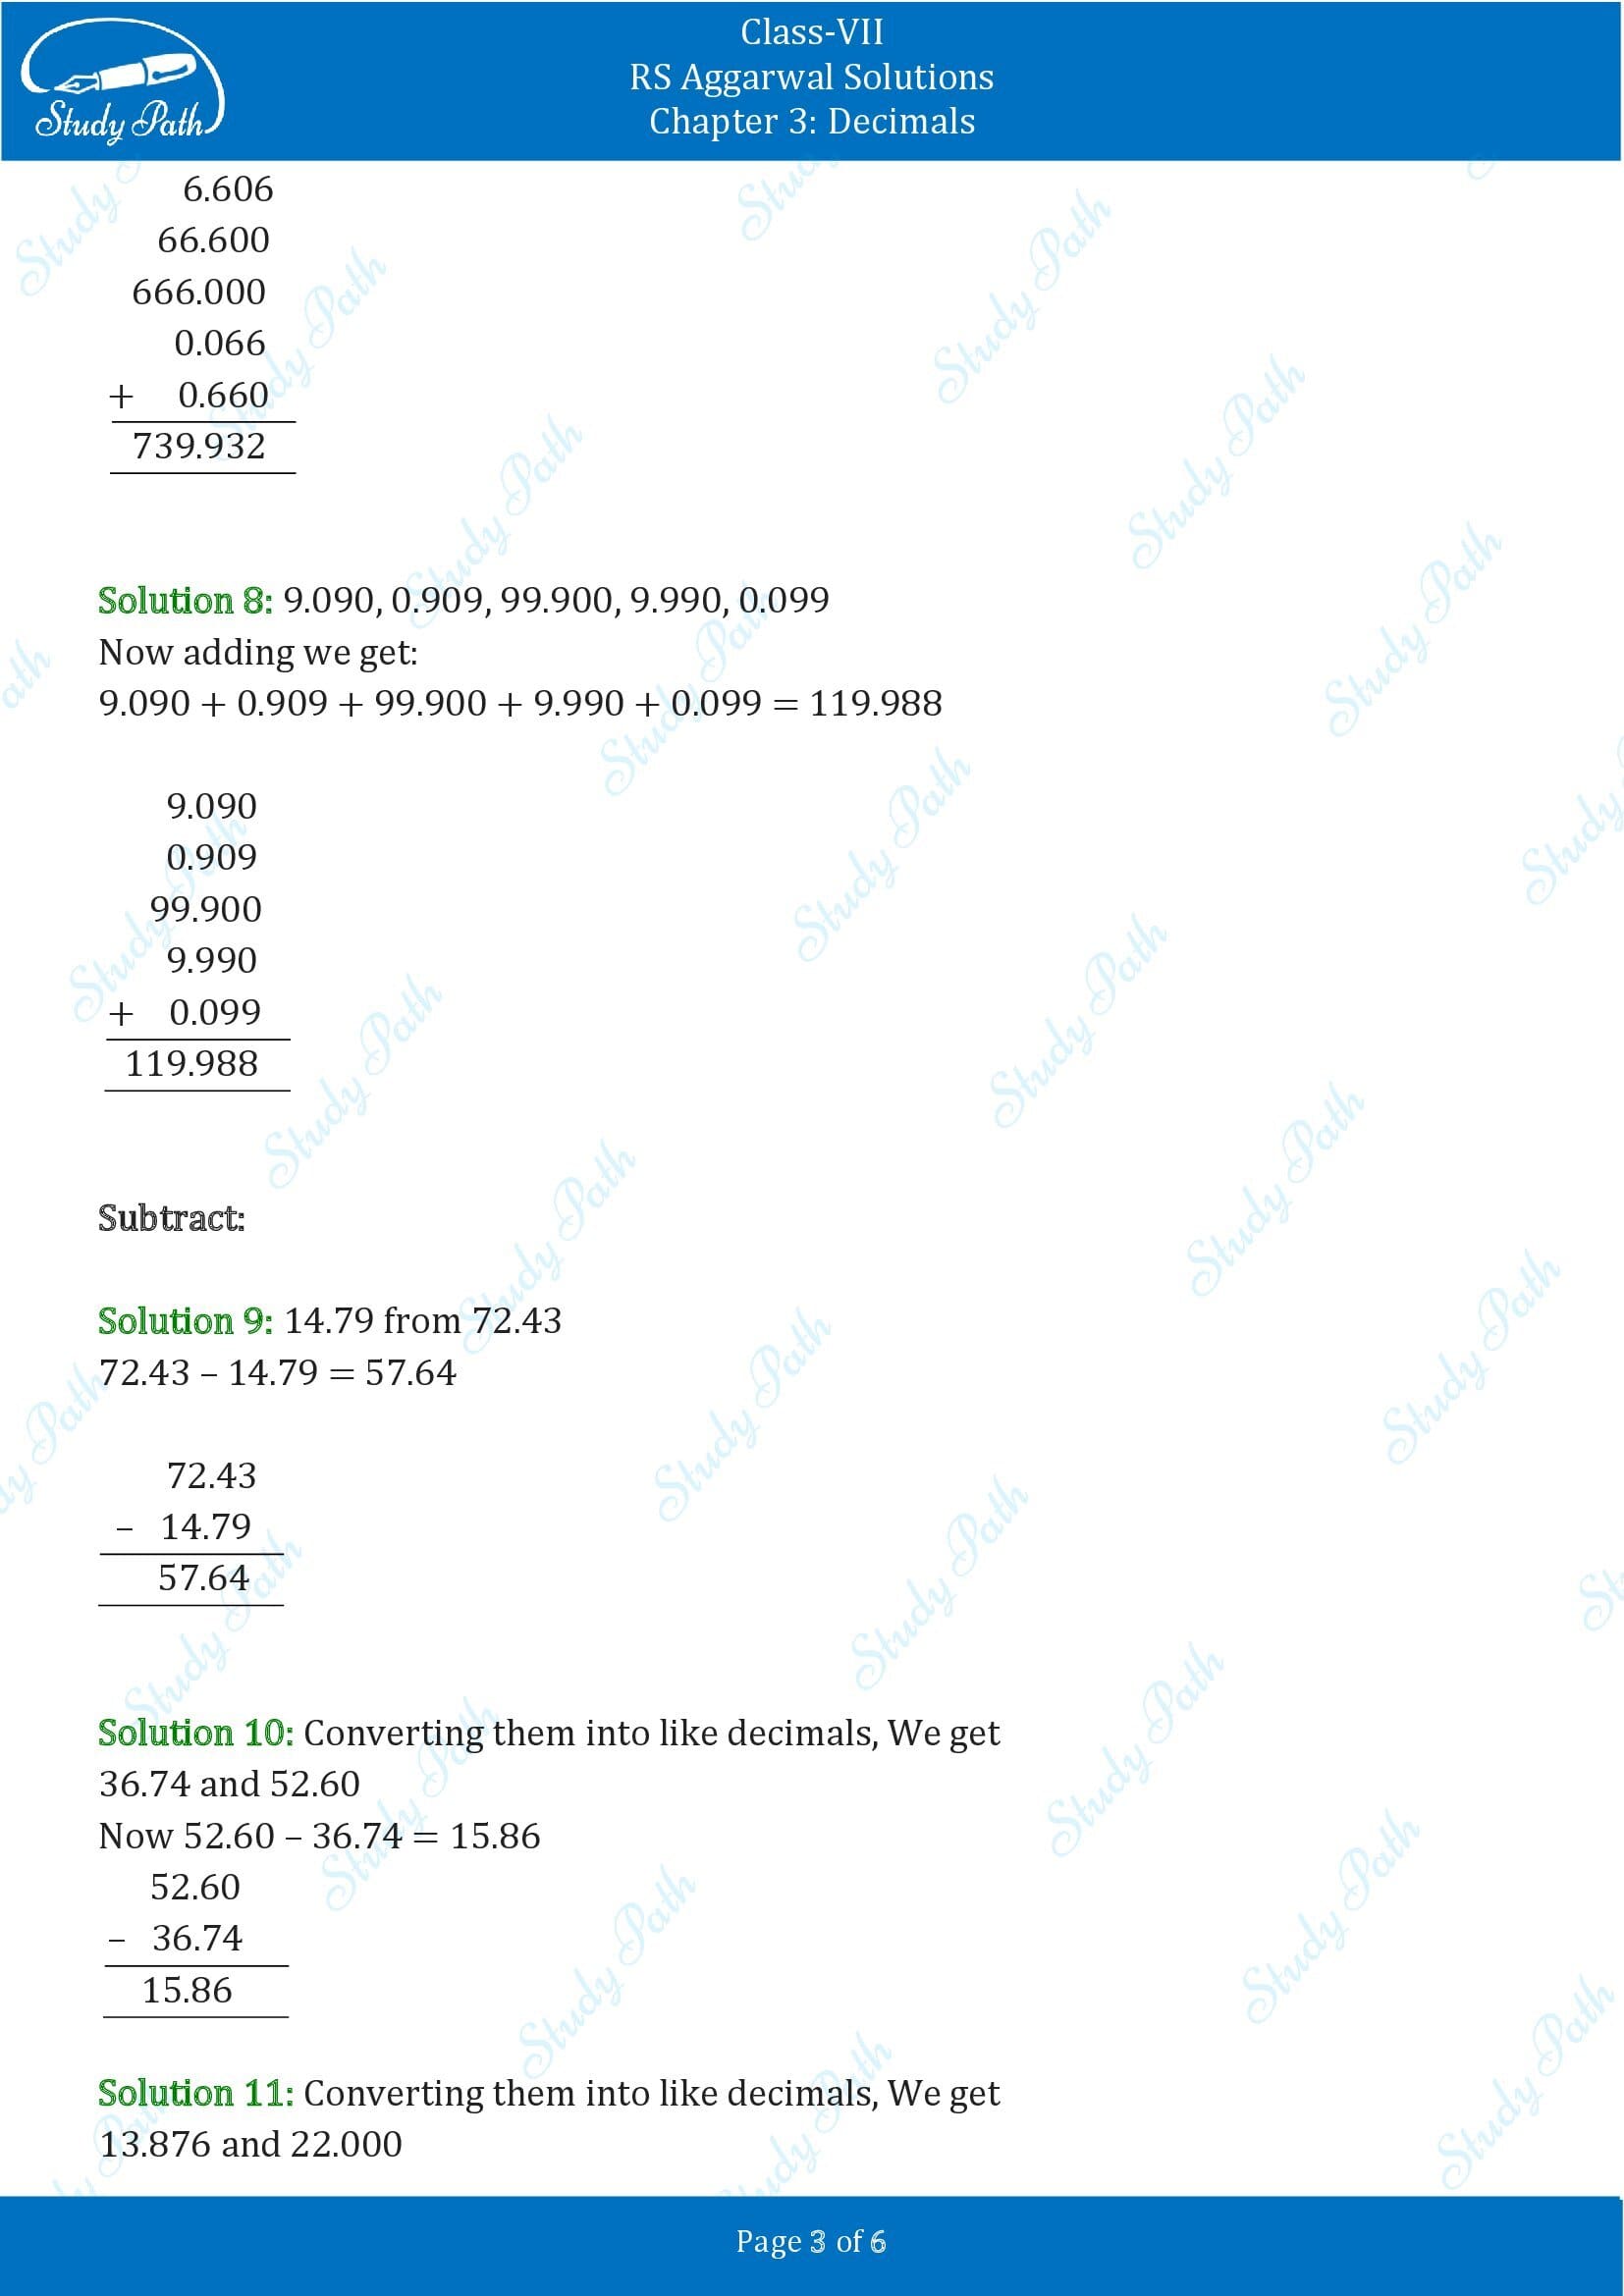 RS Aggarwal Solutions Class 7 Chapter 3 Decimals Exercise 3B 0003